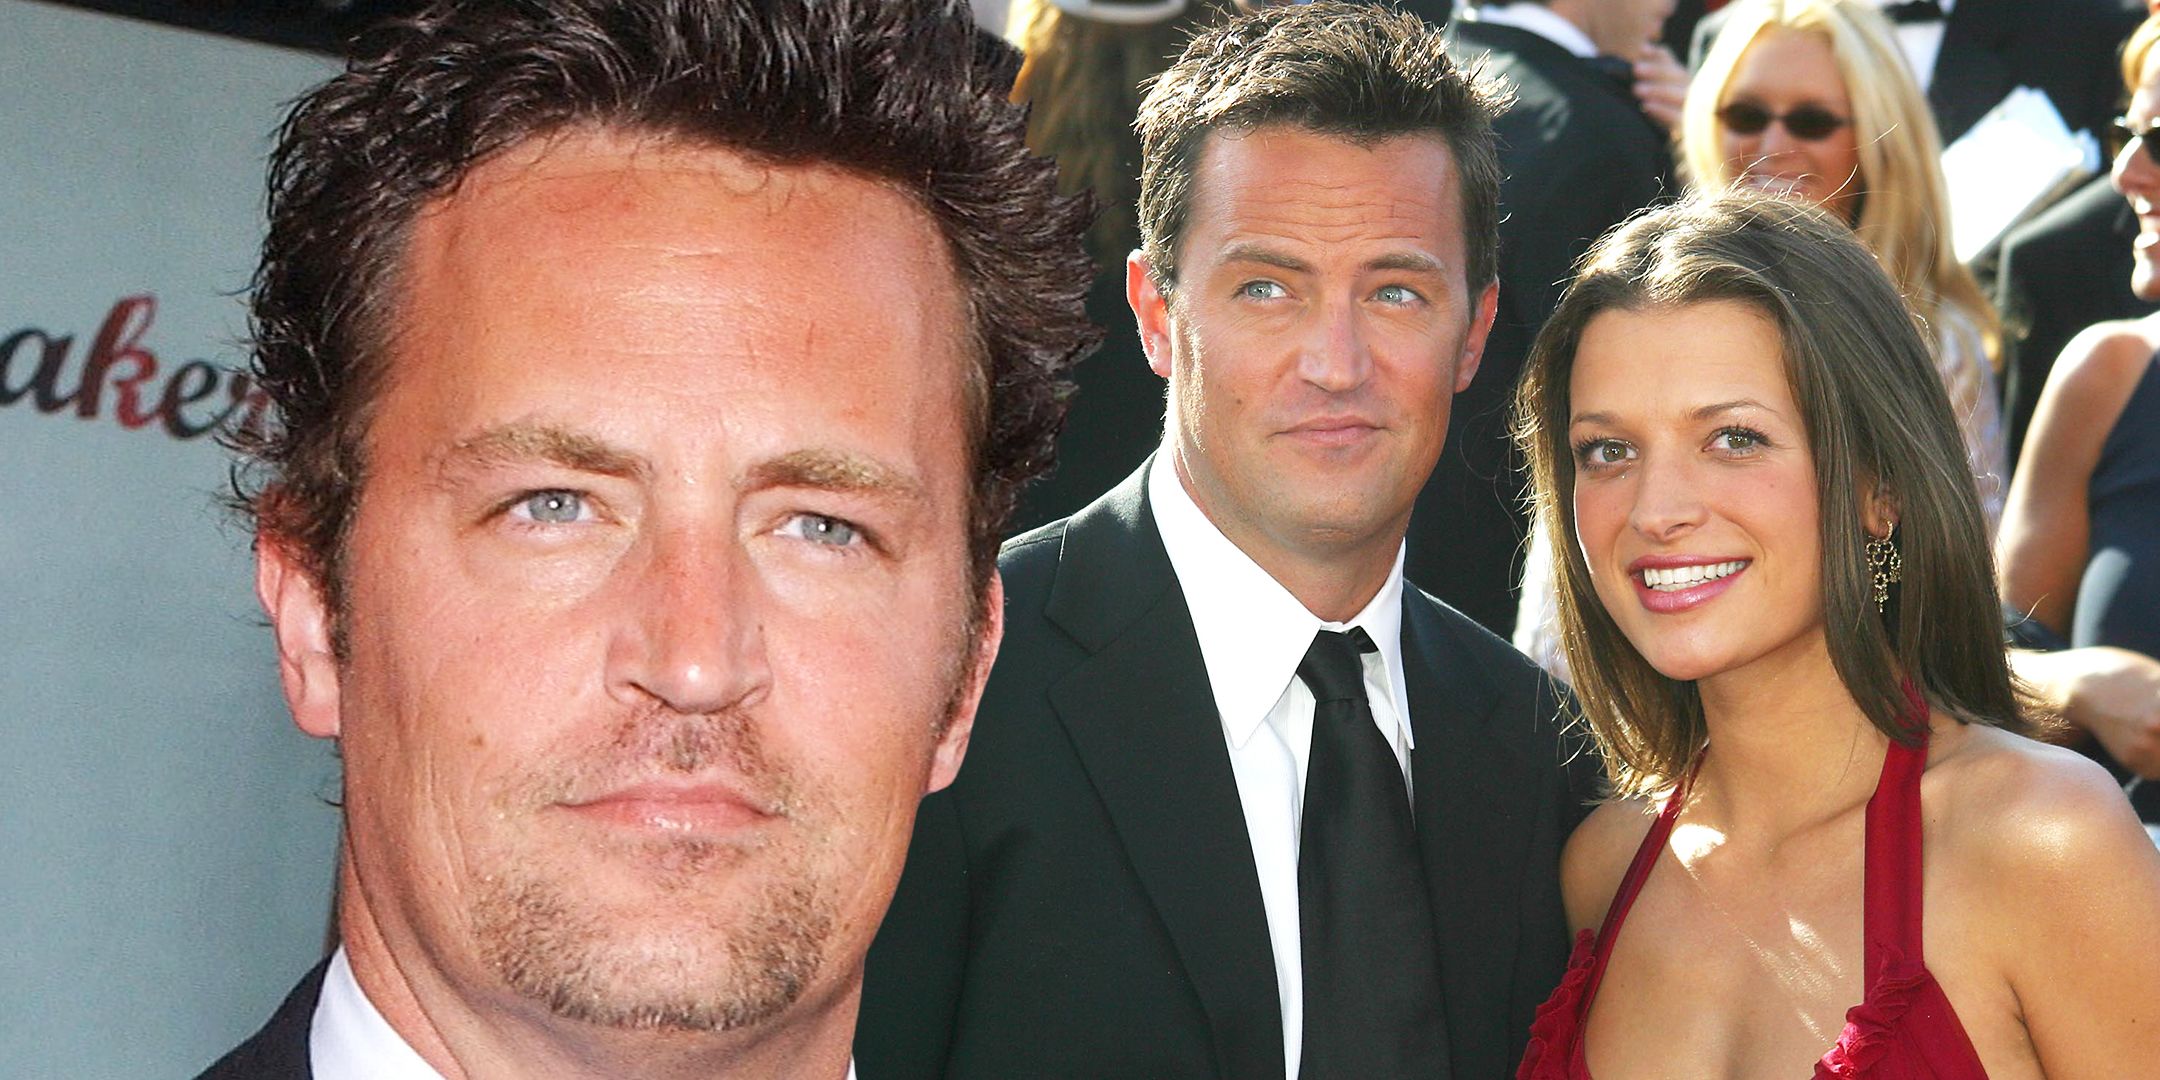 TTWEB_Matthew-Perry-Left-Some-Of-His-$120M-Net-Worth-To-A-Single-Ex-Girlfriend_BK_A1